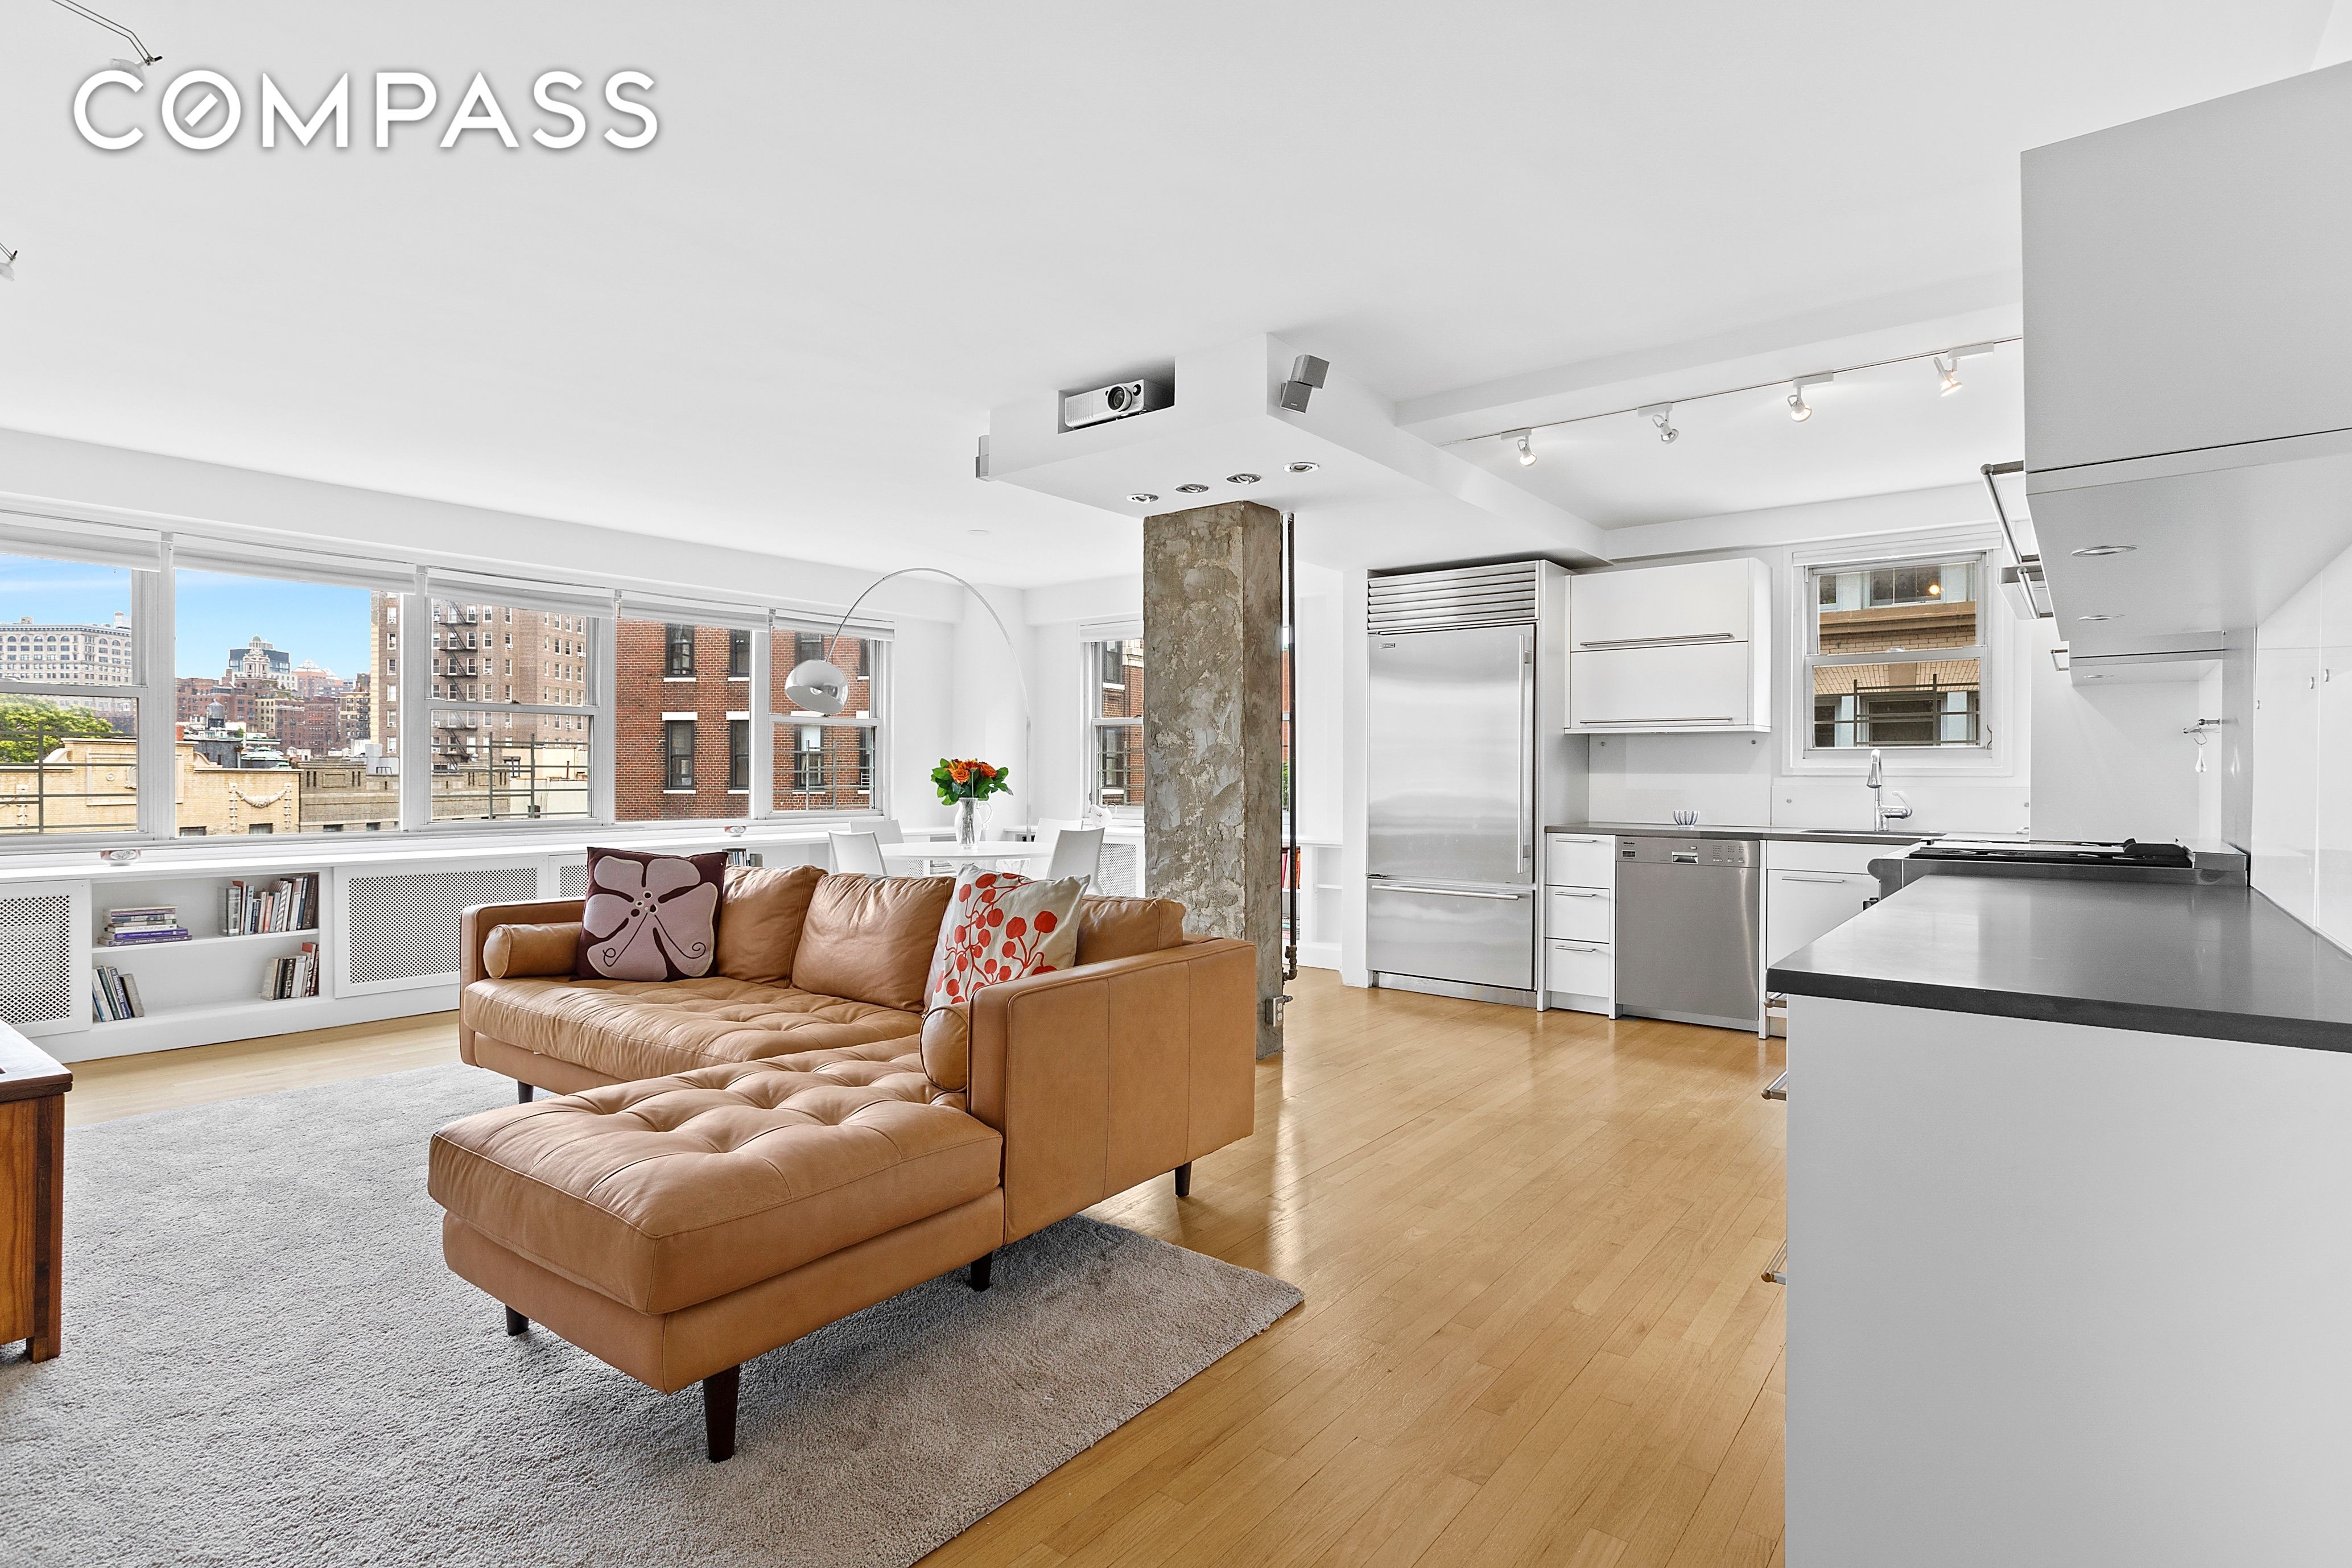 Co-op Properties for Sale at 3 SHERIDAN SQ, 8H West Village, New York, New York 10014